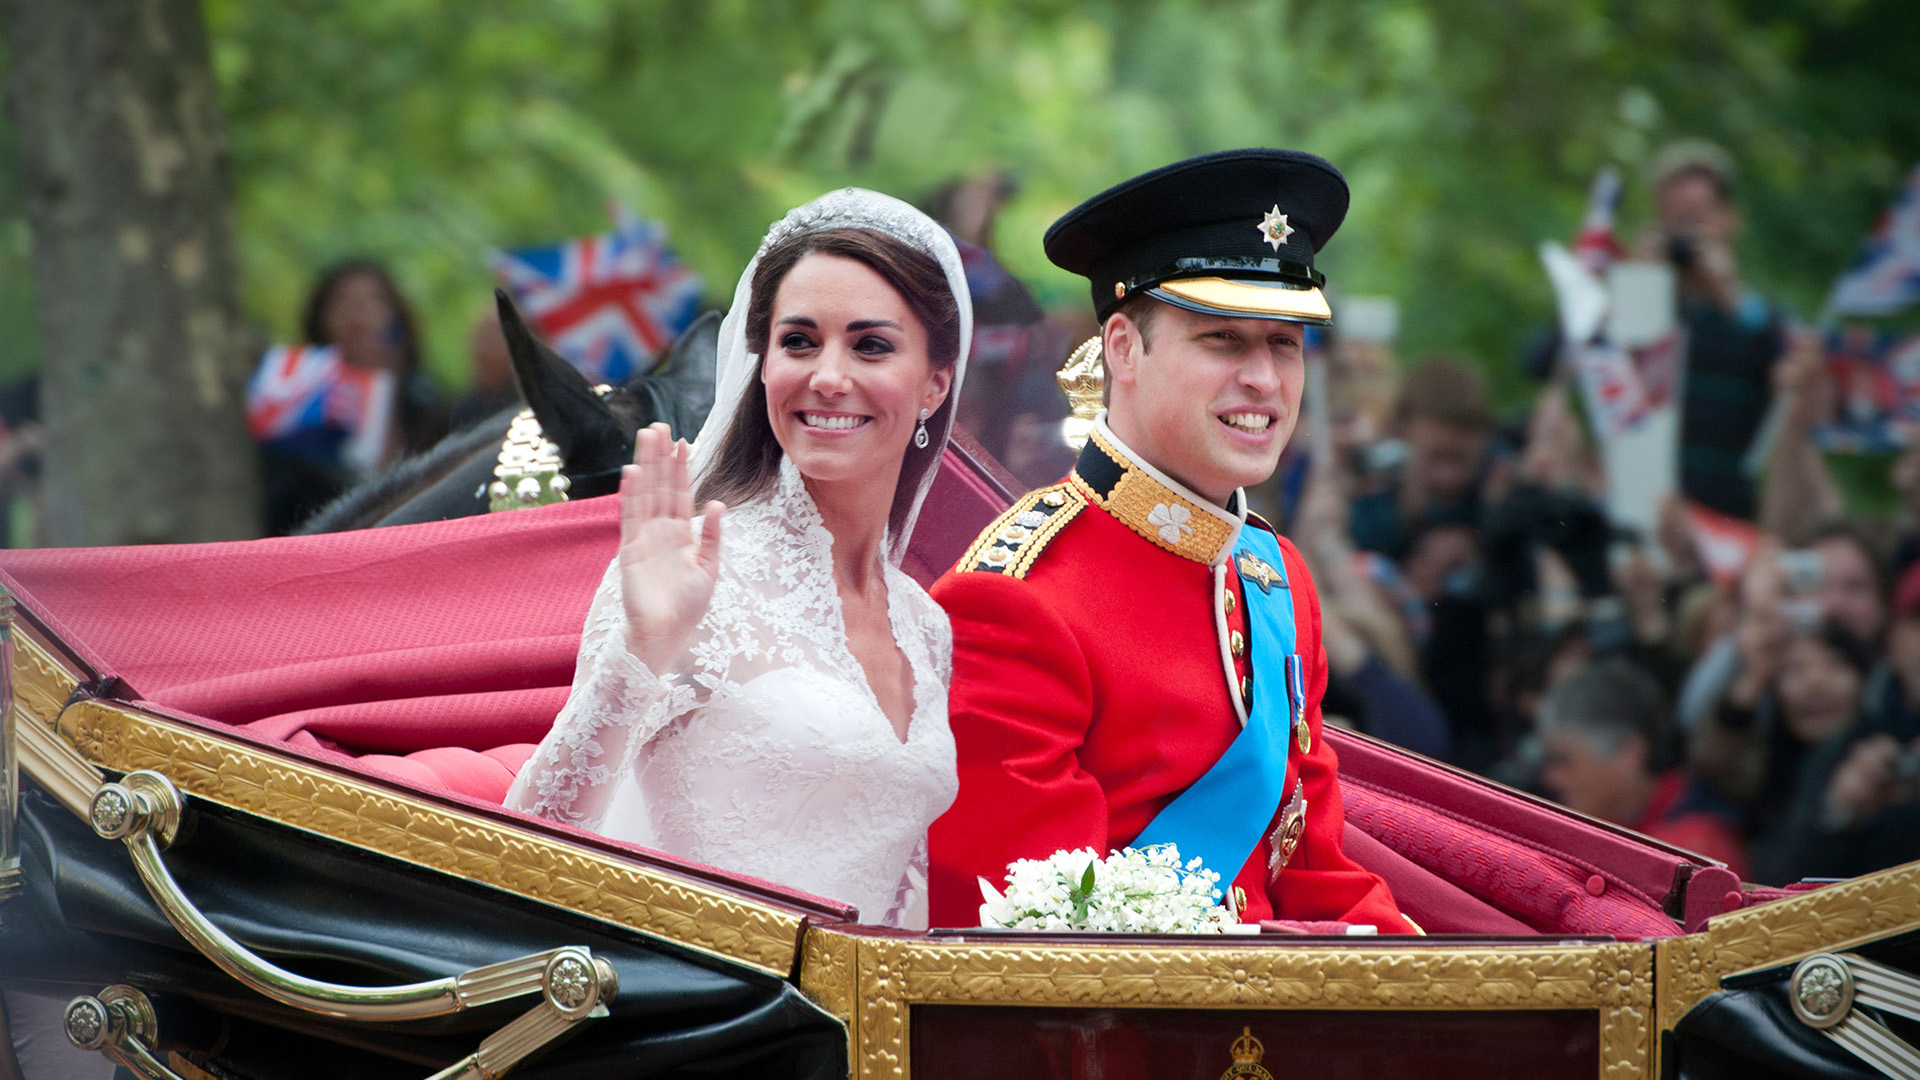 7 Most Ridiculous Rumors About the Royal Family